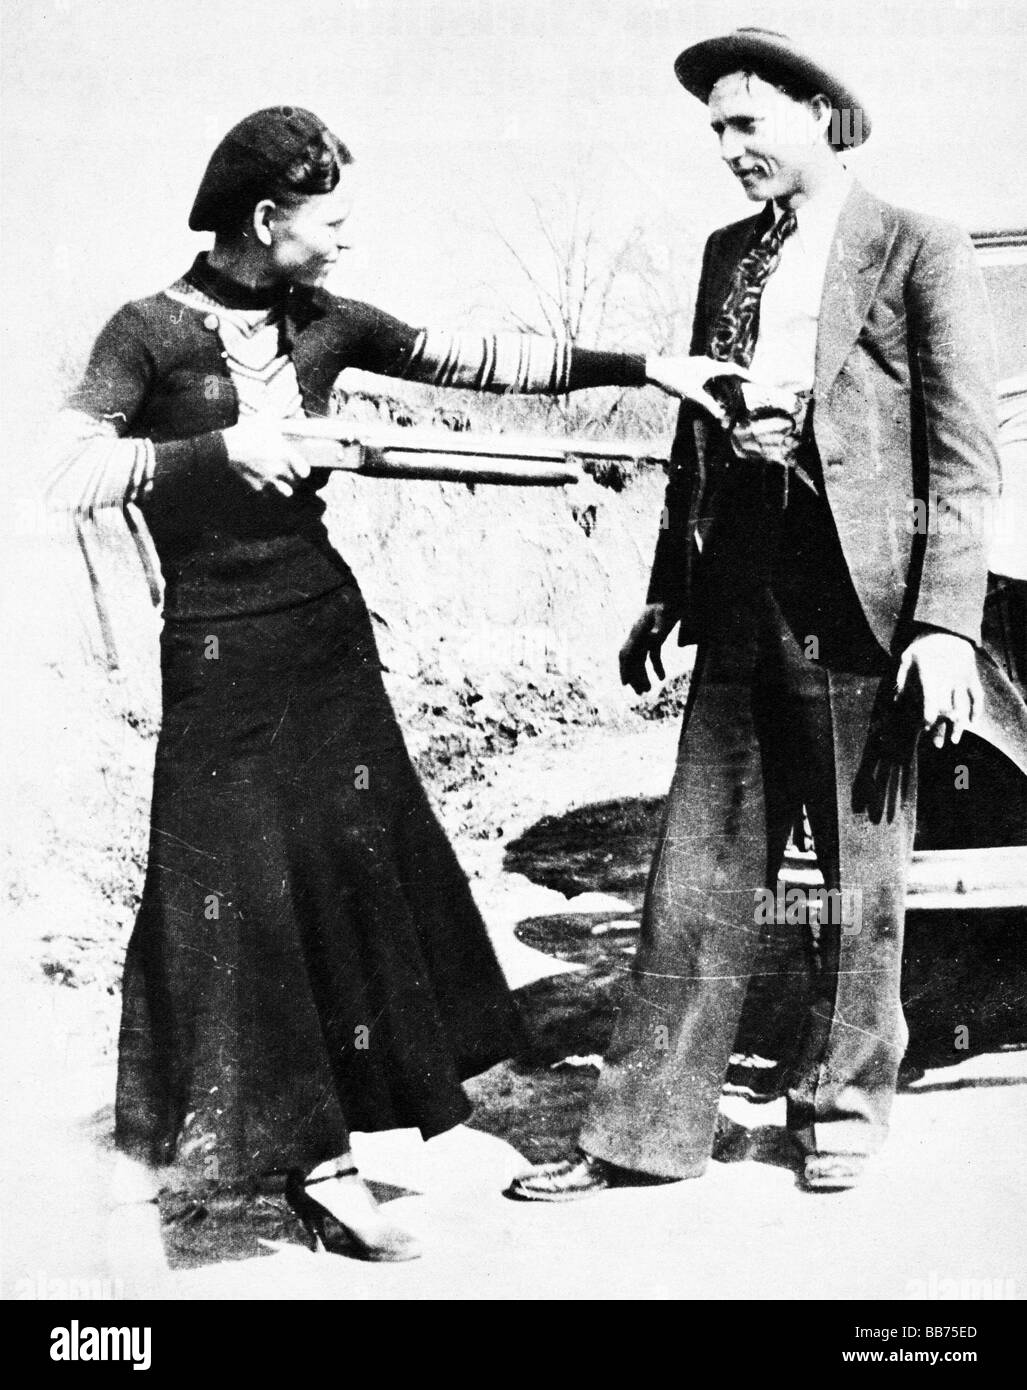 Bonnie and Clyde 1933 photo of the infamous outlaws taken by themselves while on the run Stock Photo